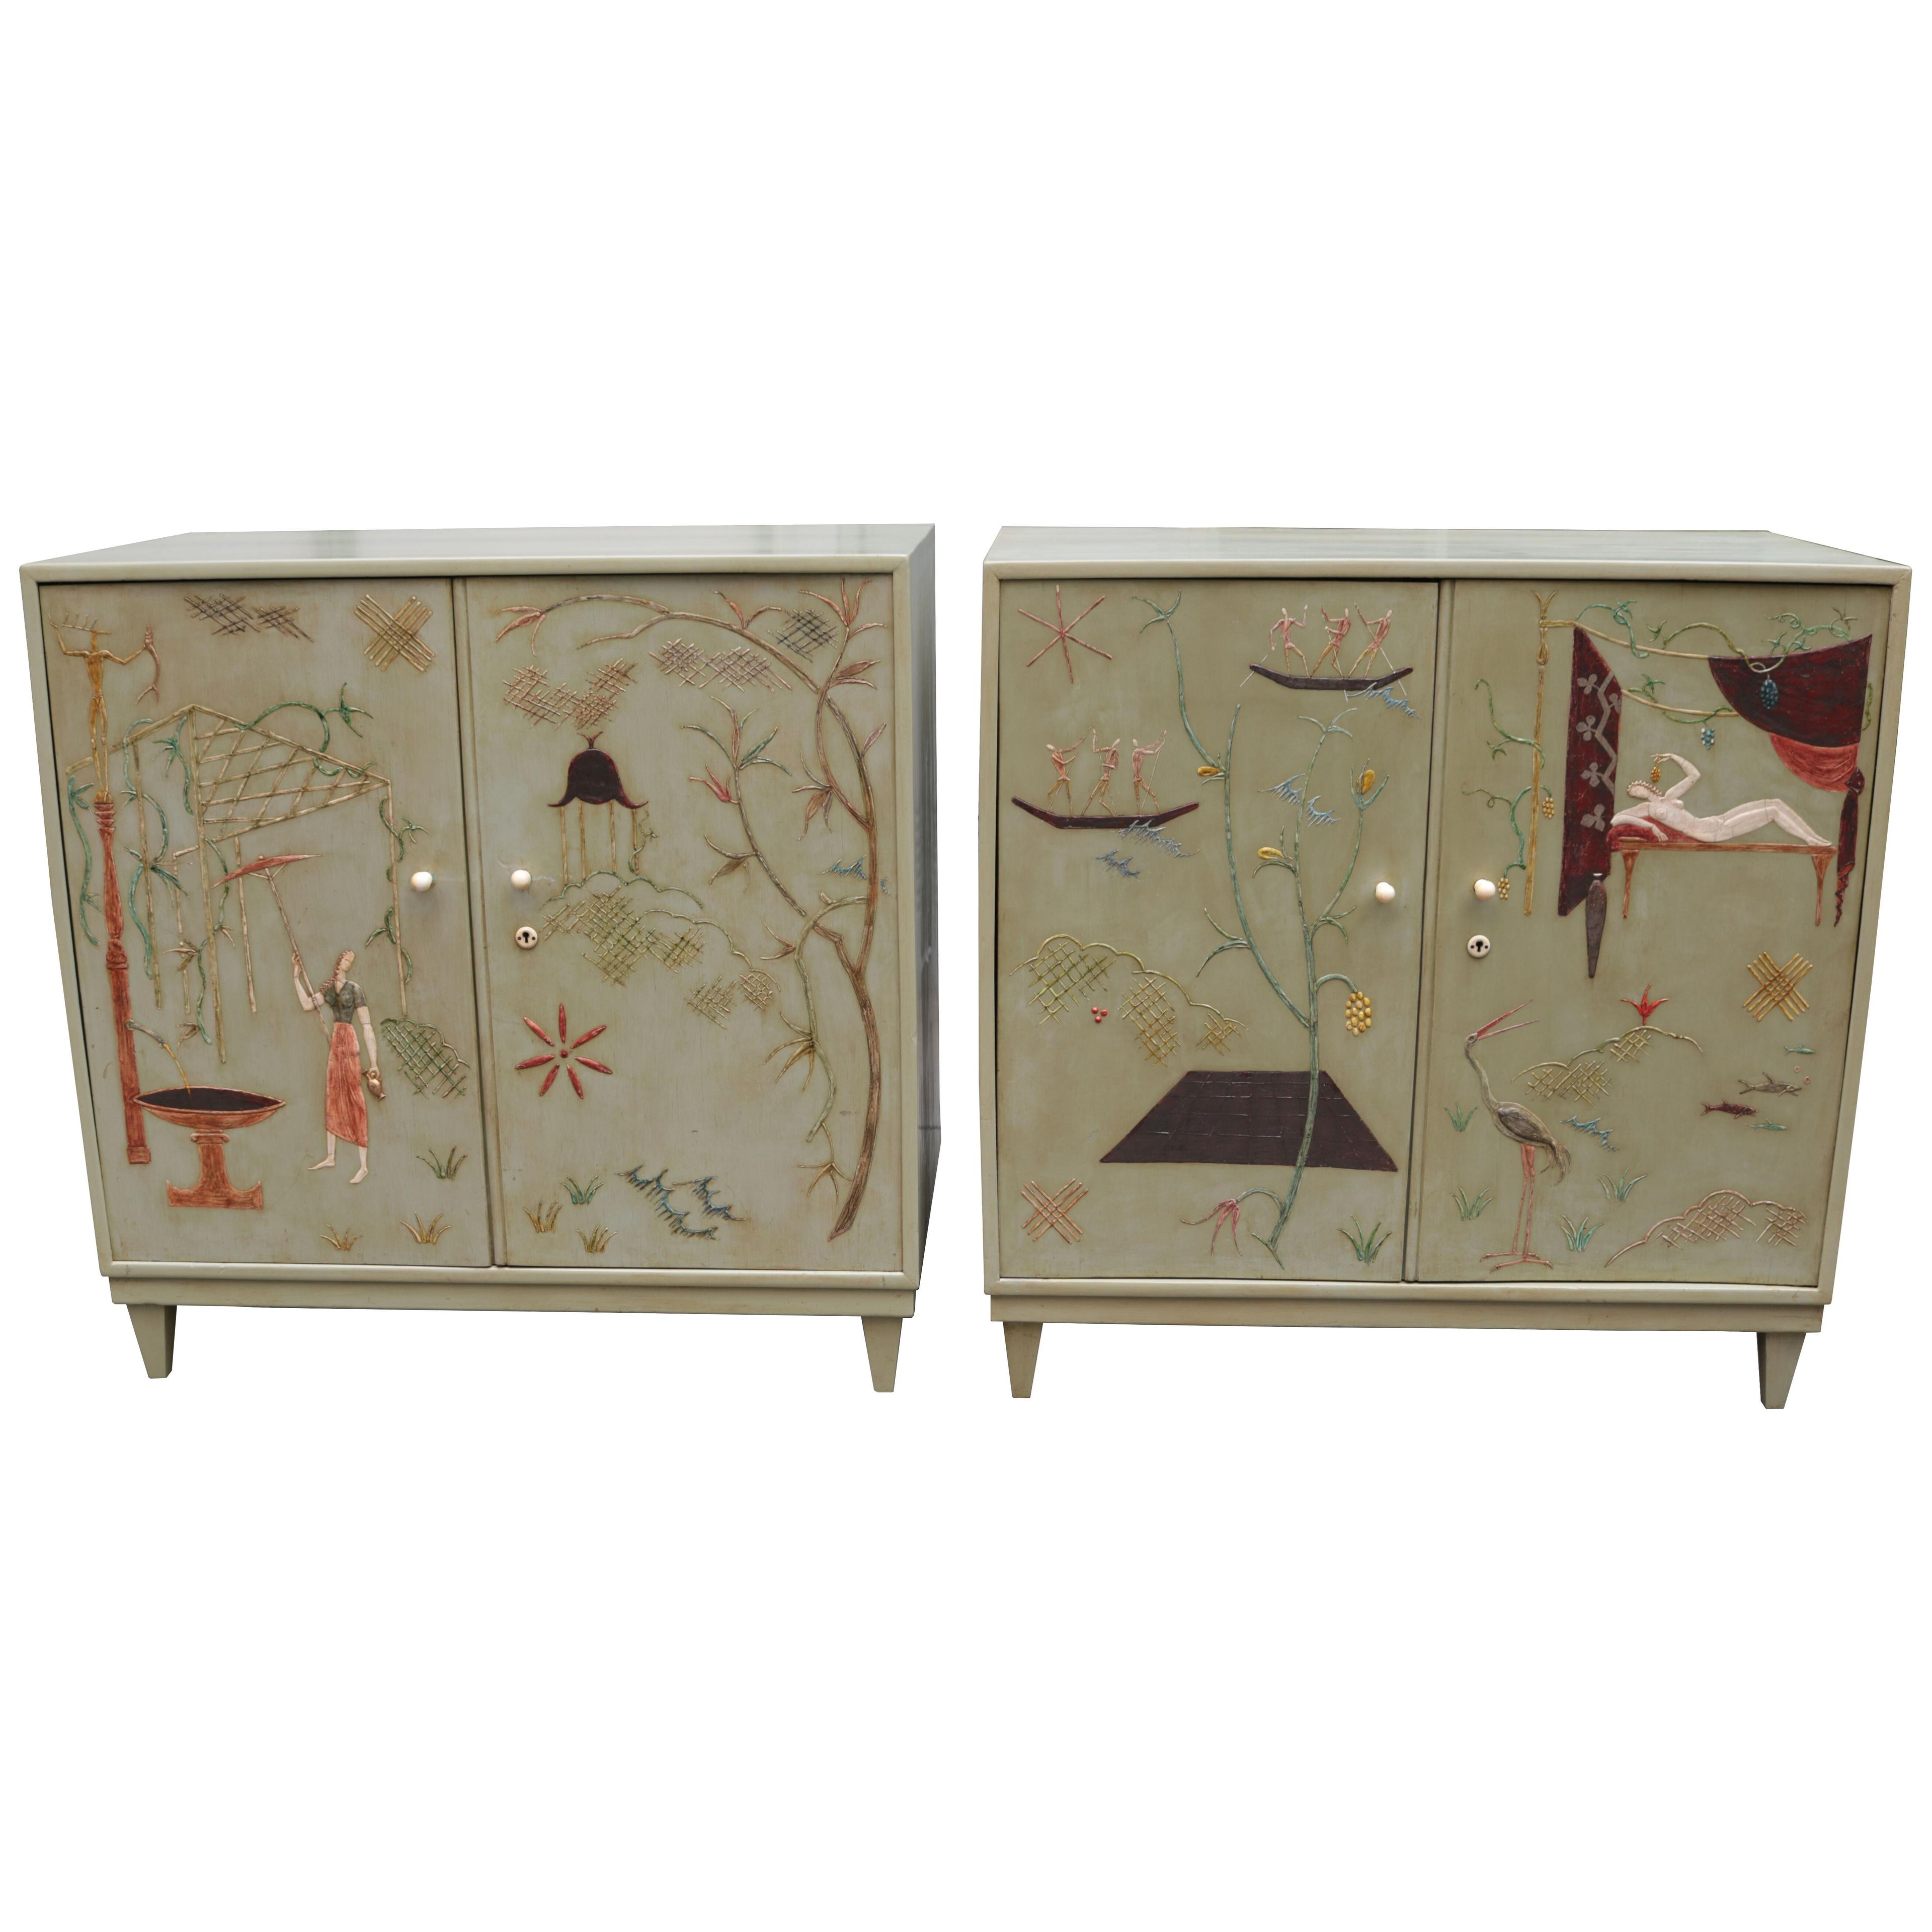 PAIR OF PAINTED CABINETS IN THE MANNER OF GIO PONTI